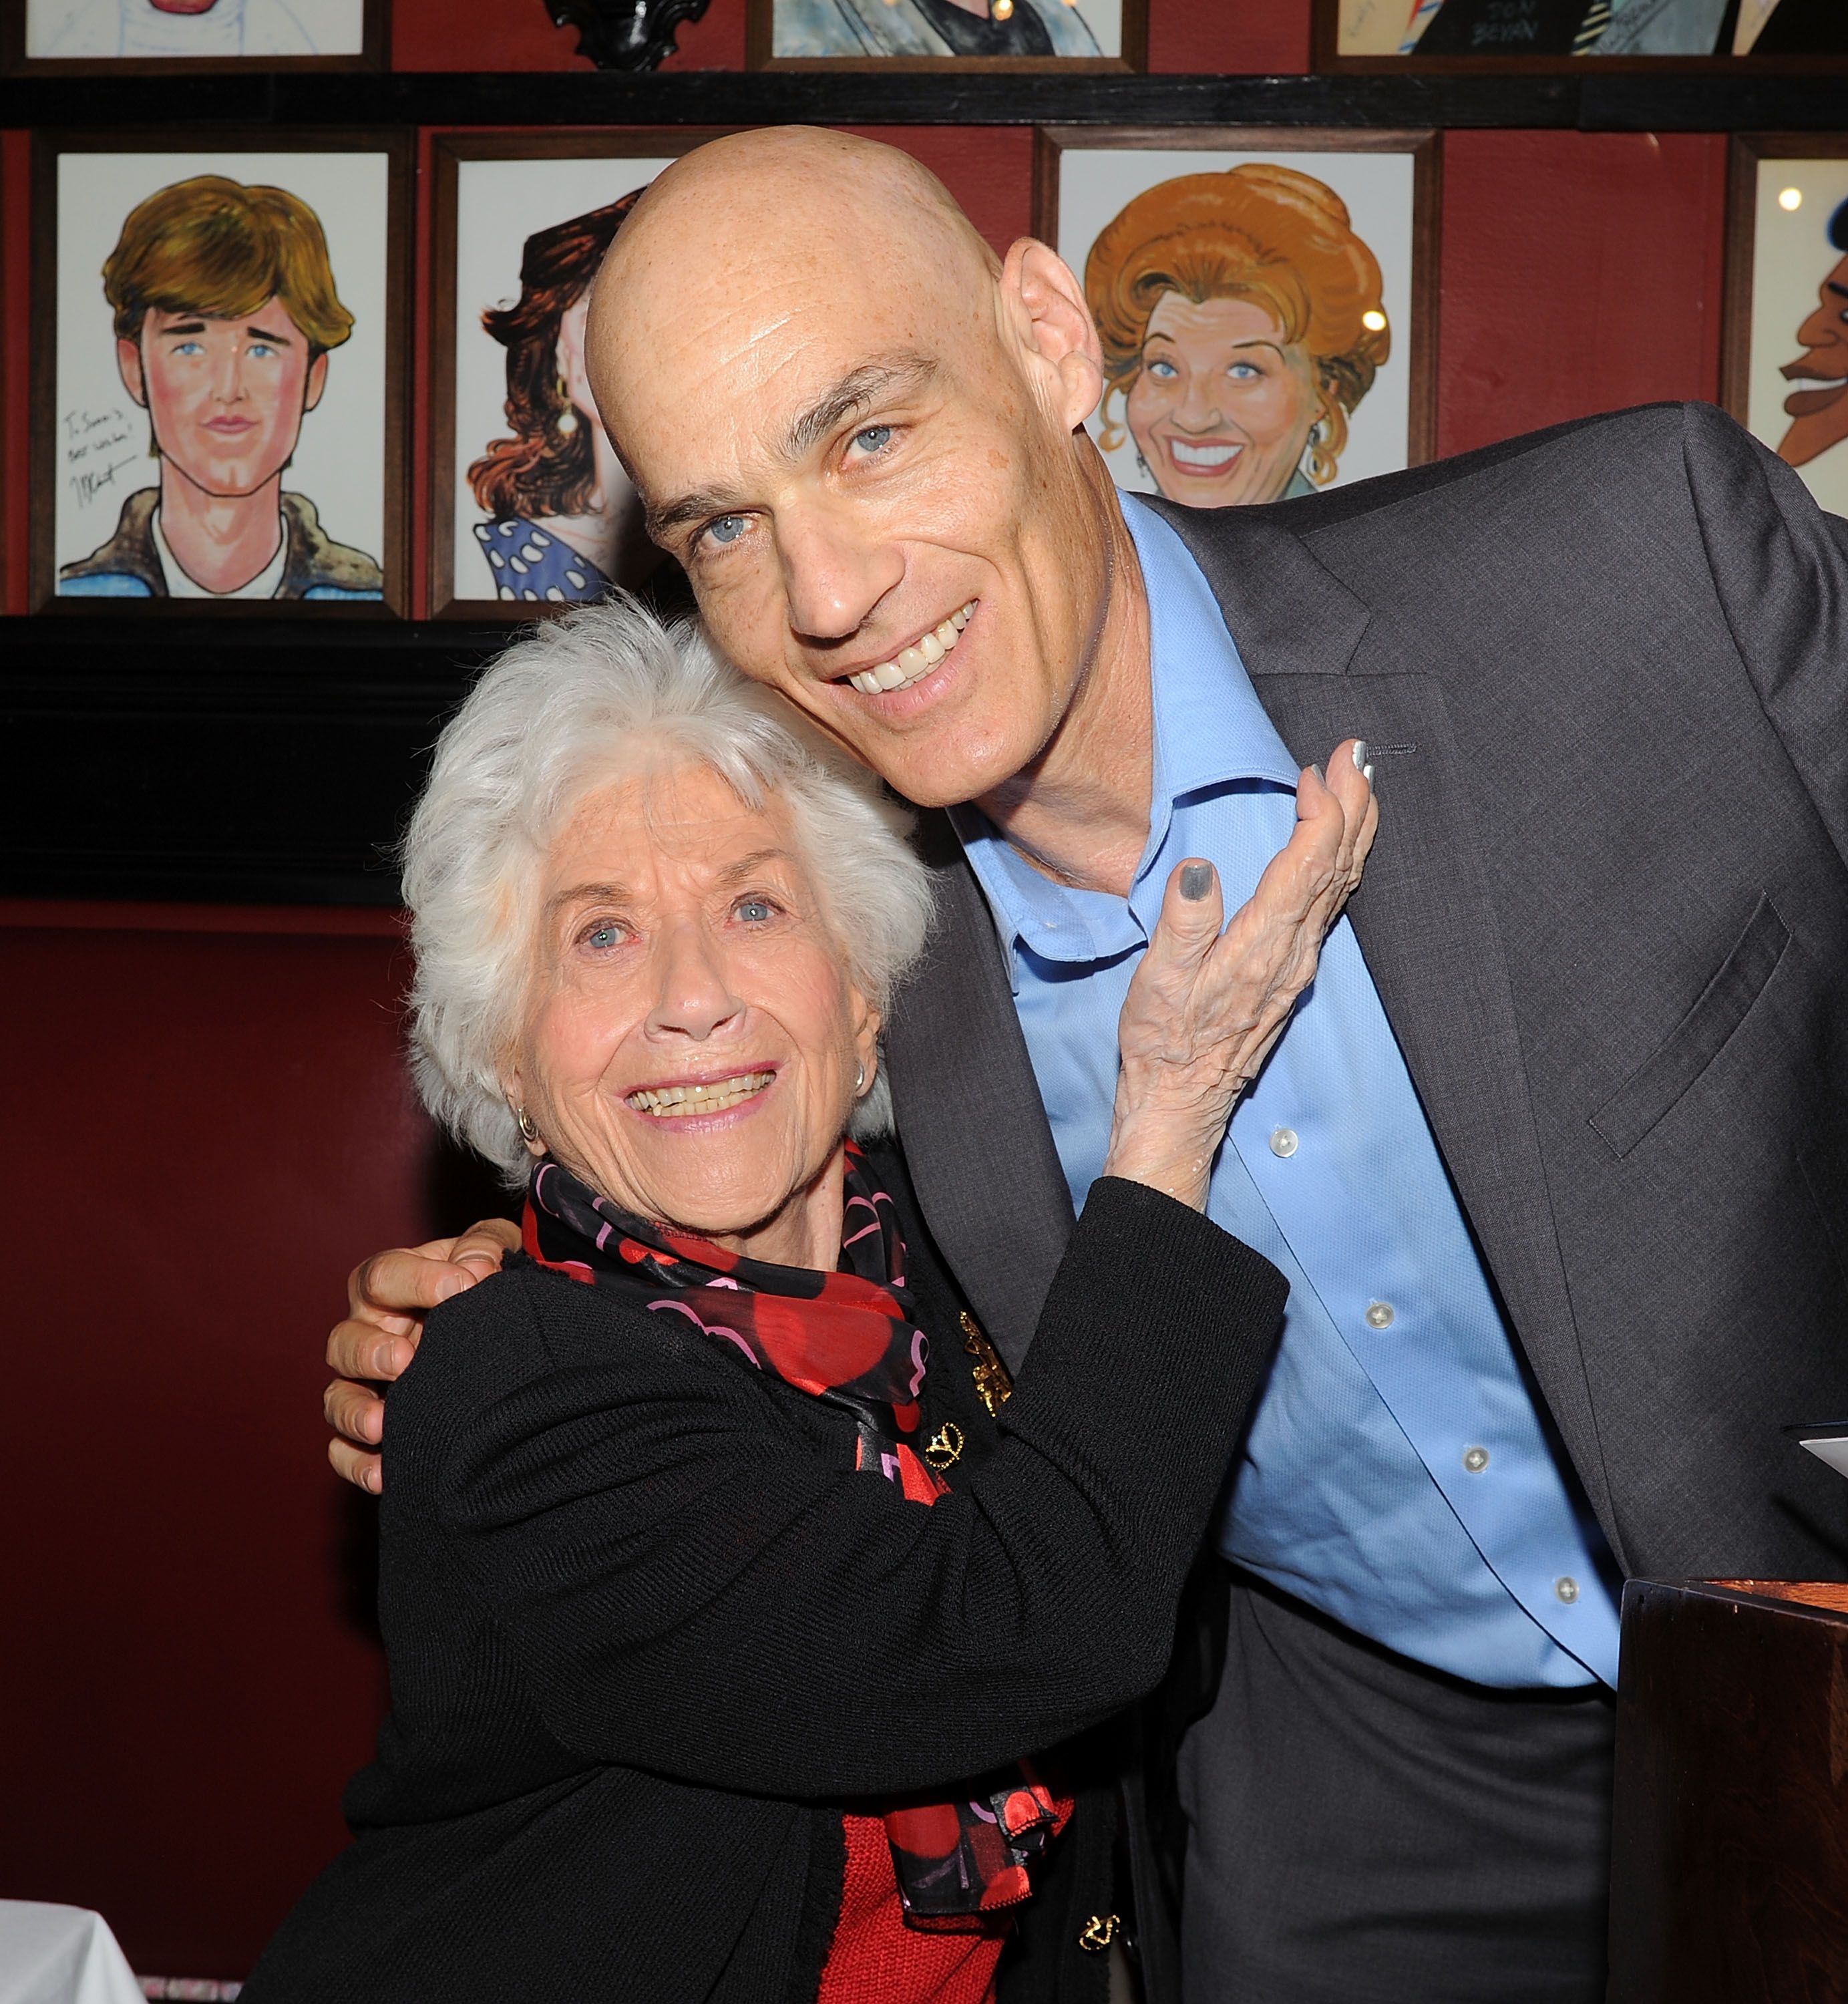  Charlotte Rae and Larry Strauss promotes her book "The Facts of My Life" at Sardi's on November 3, 2015 in New York City. | Source: Getty Images